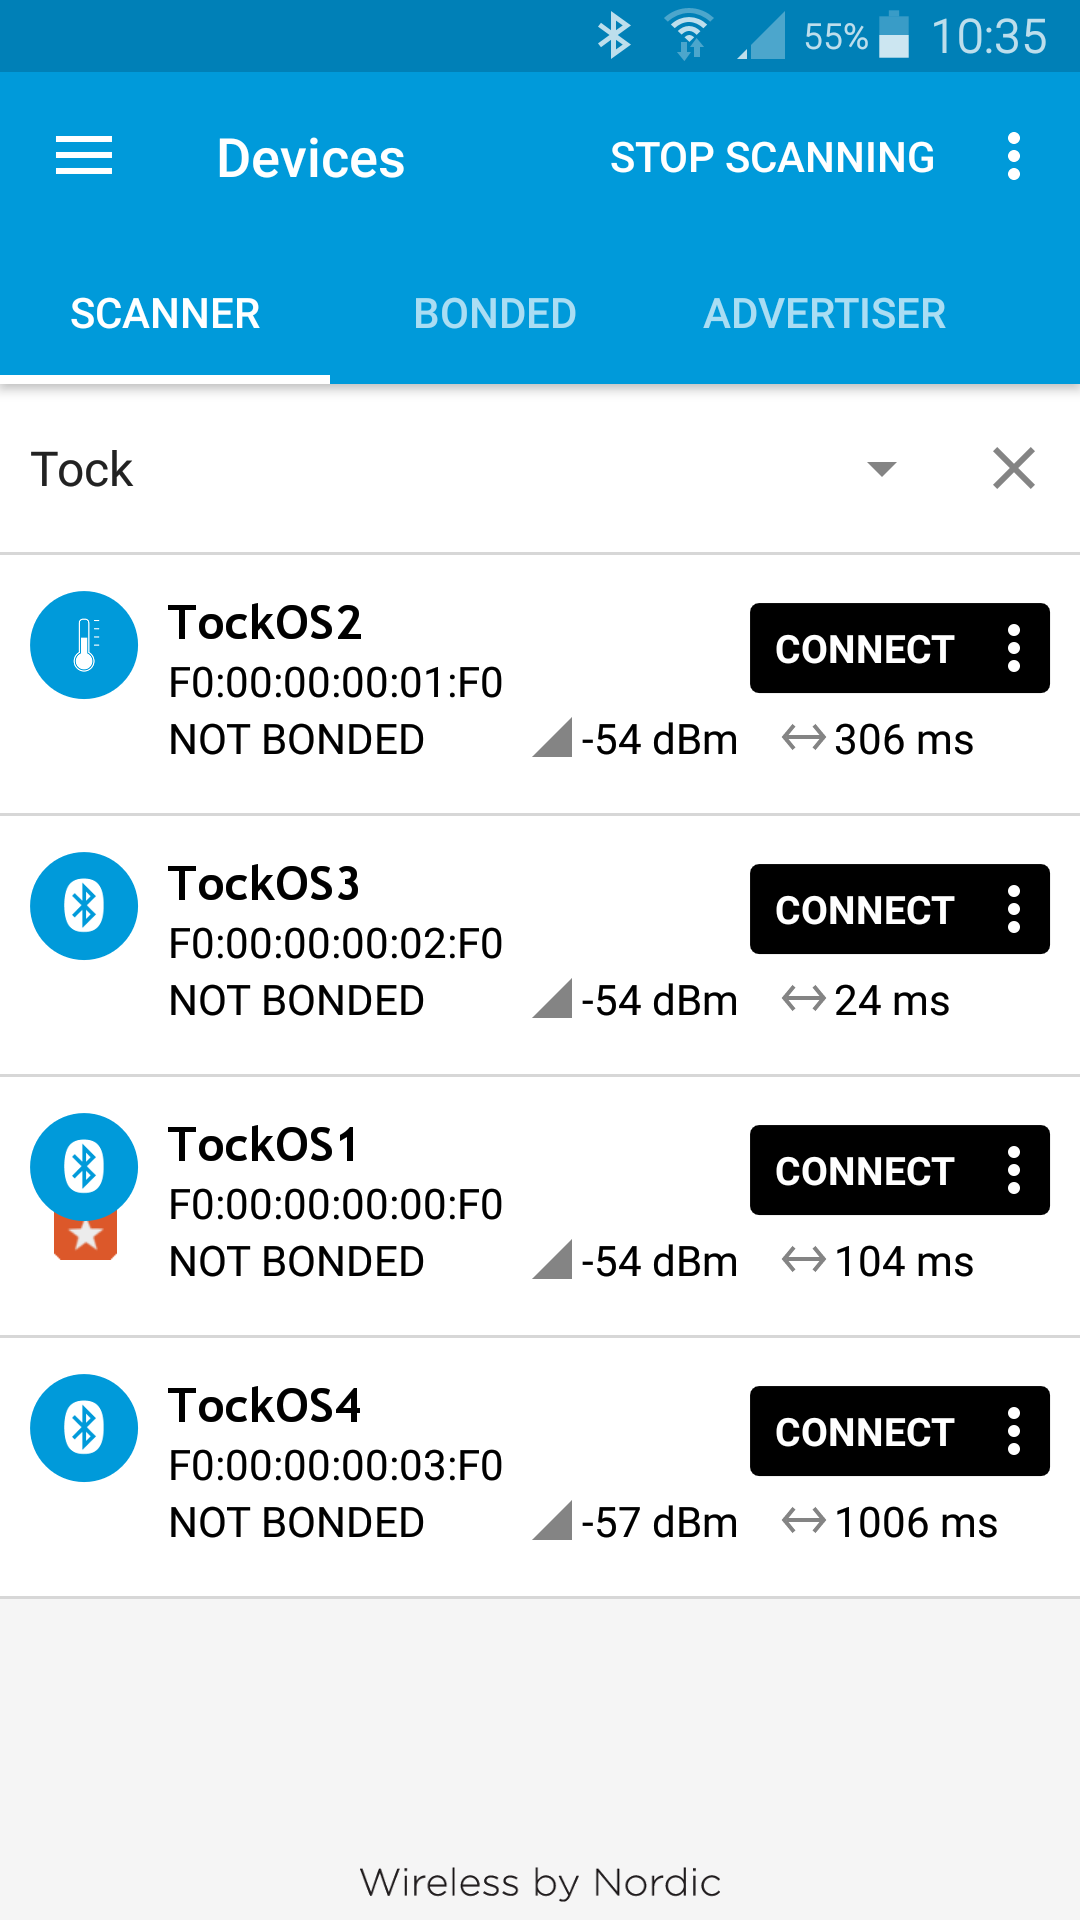 Four Tock processes, each advertising as a separate device. Picked up on an
Android phone